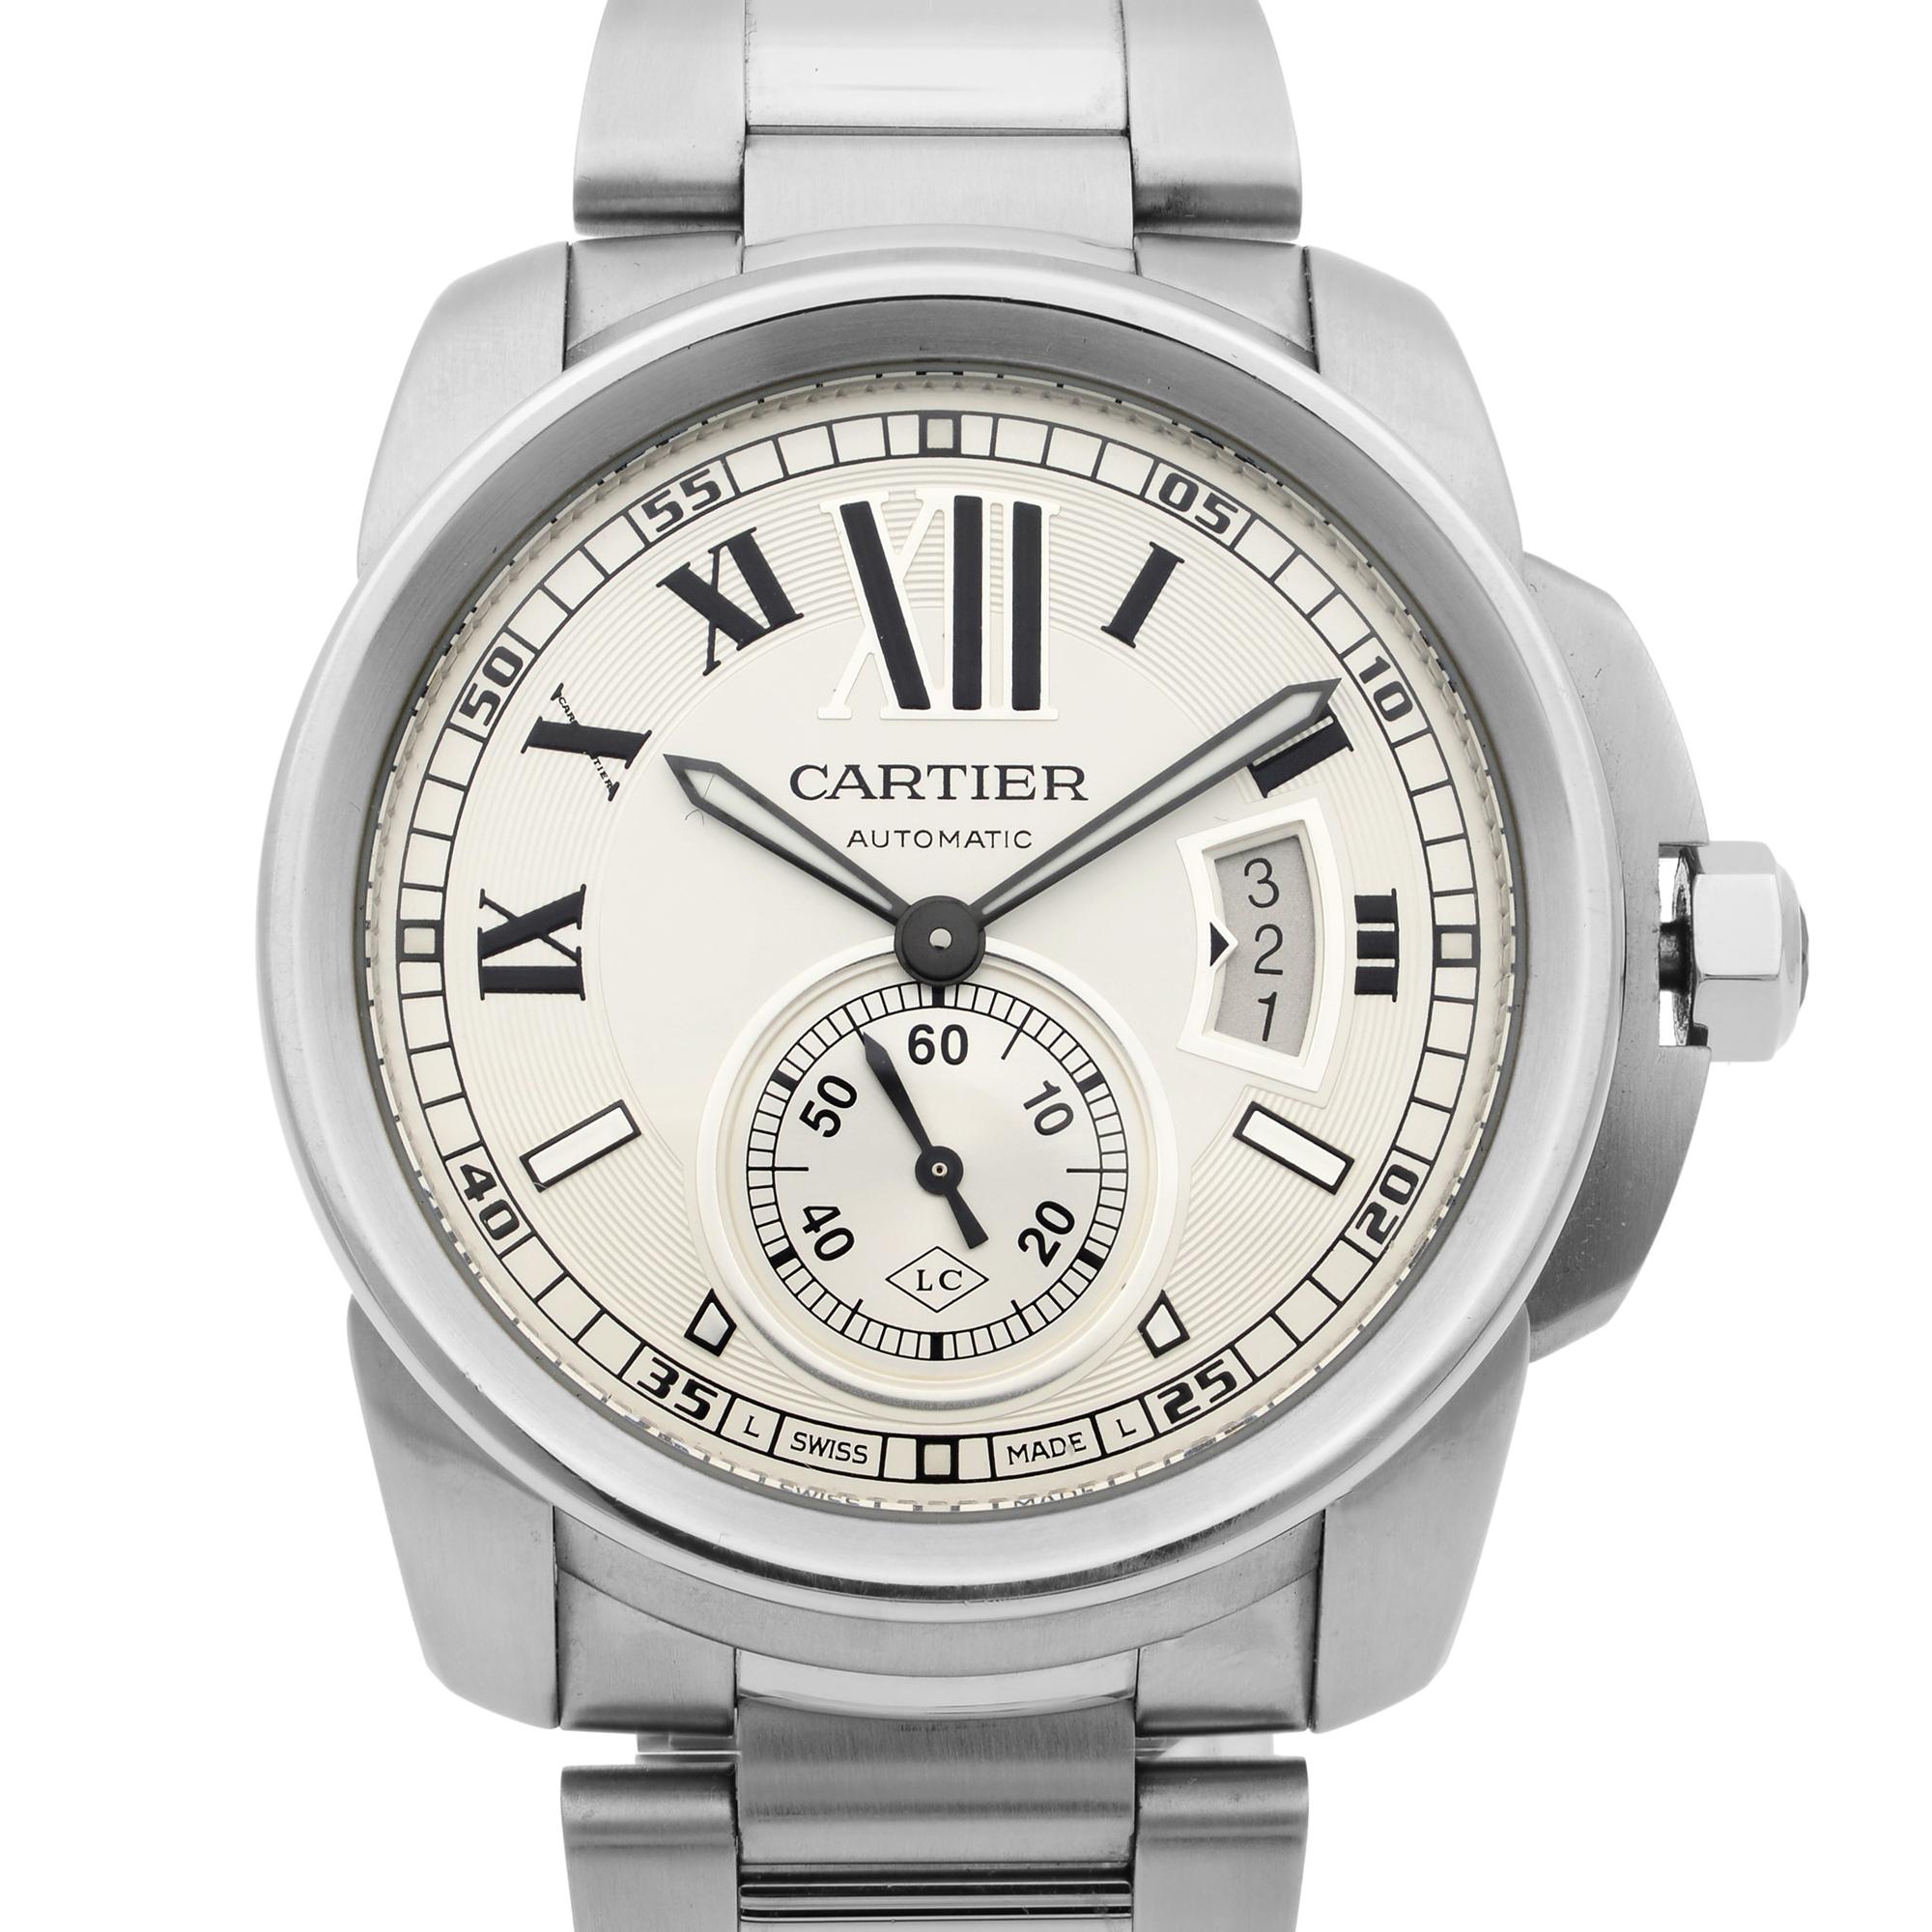 This pre-owned Cartier Calibre de Cartier  W7100015 is a beautiful men's timepiece that is powered by mechanical (automatic) movement which is cased in a stainless steel case. It has a round shape face, date indicator, small seconds subdial dial and